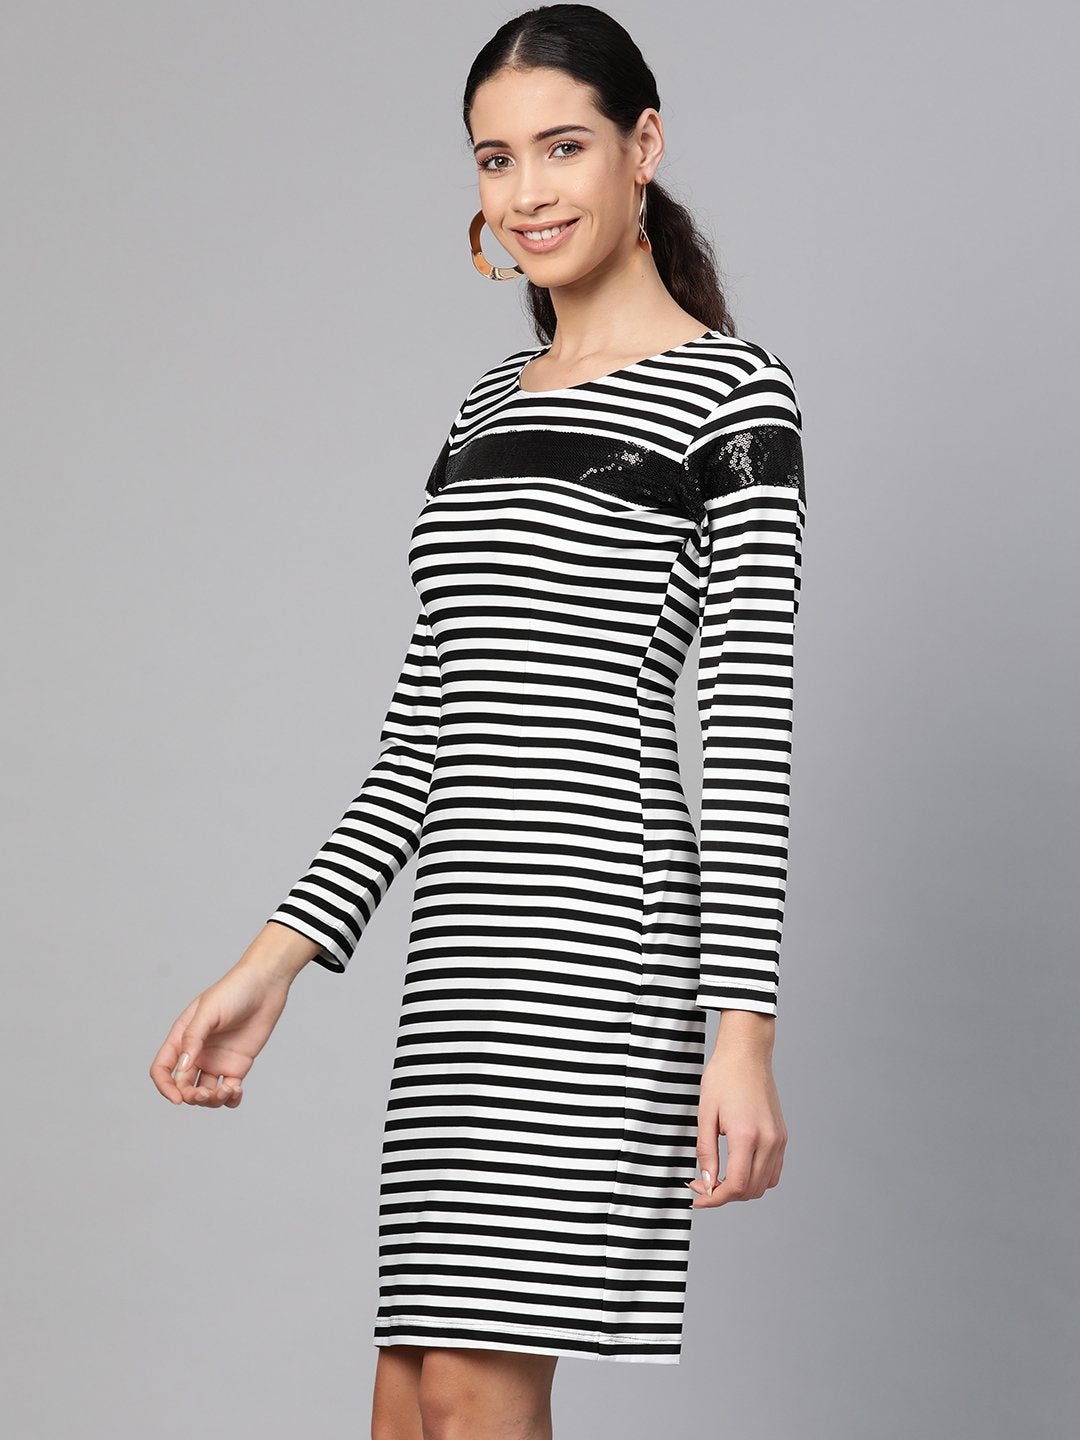 Women's Stripe Dress With Sequin Patch - Pannkh